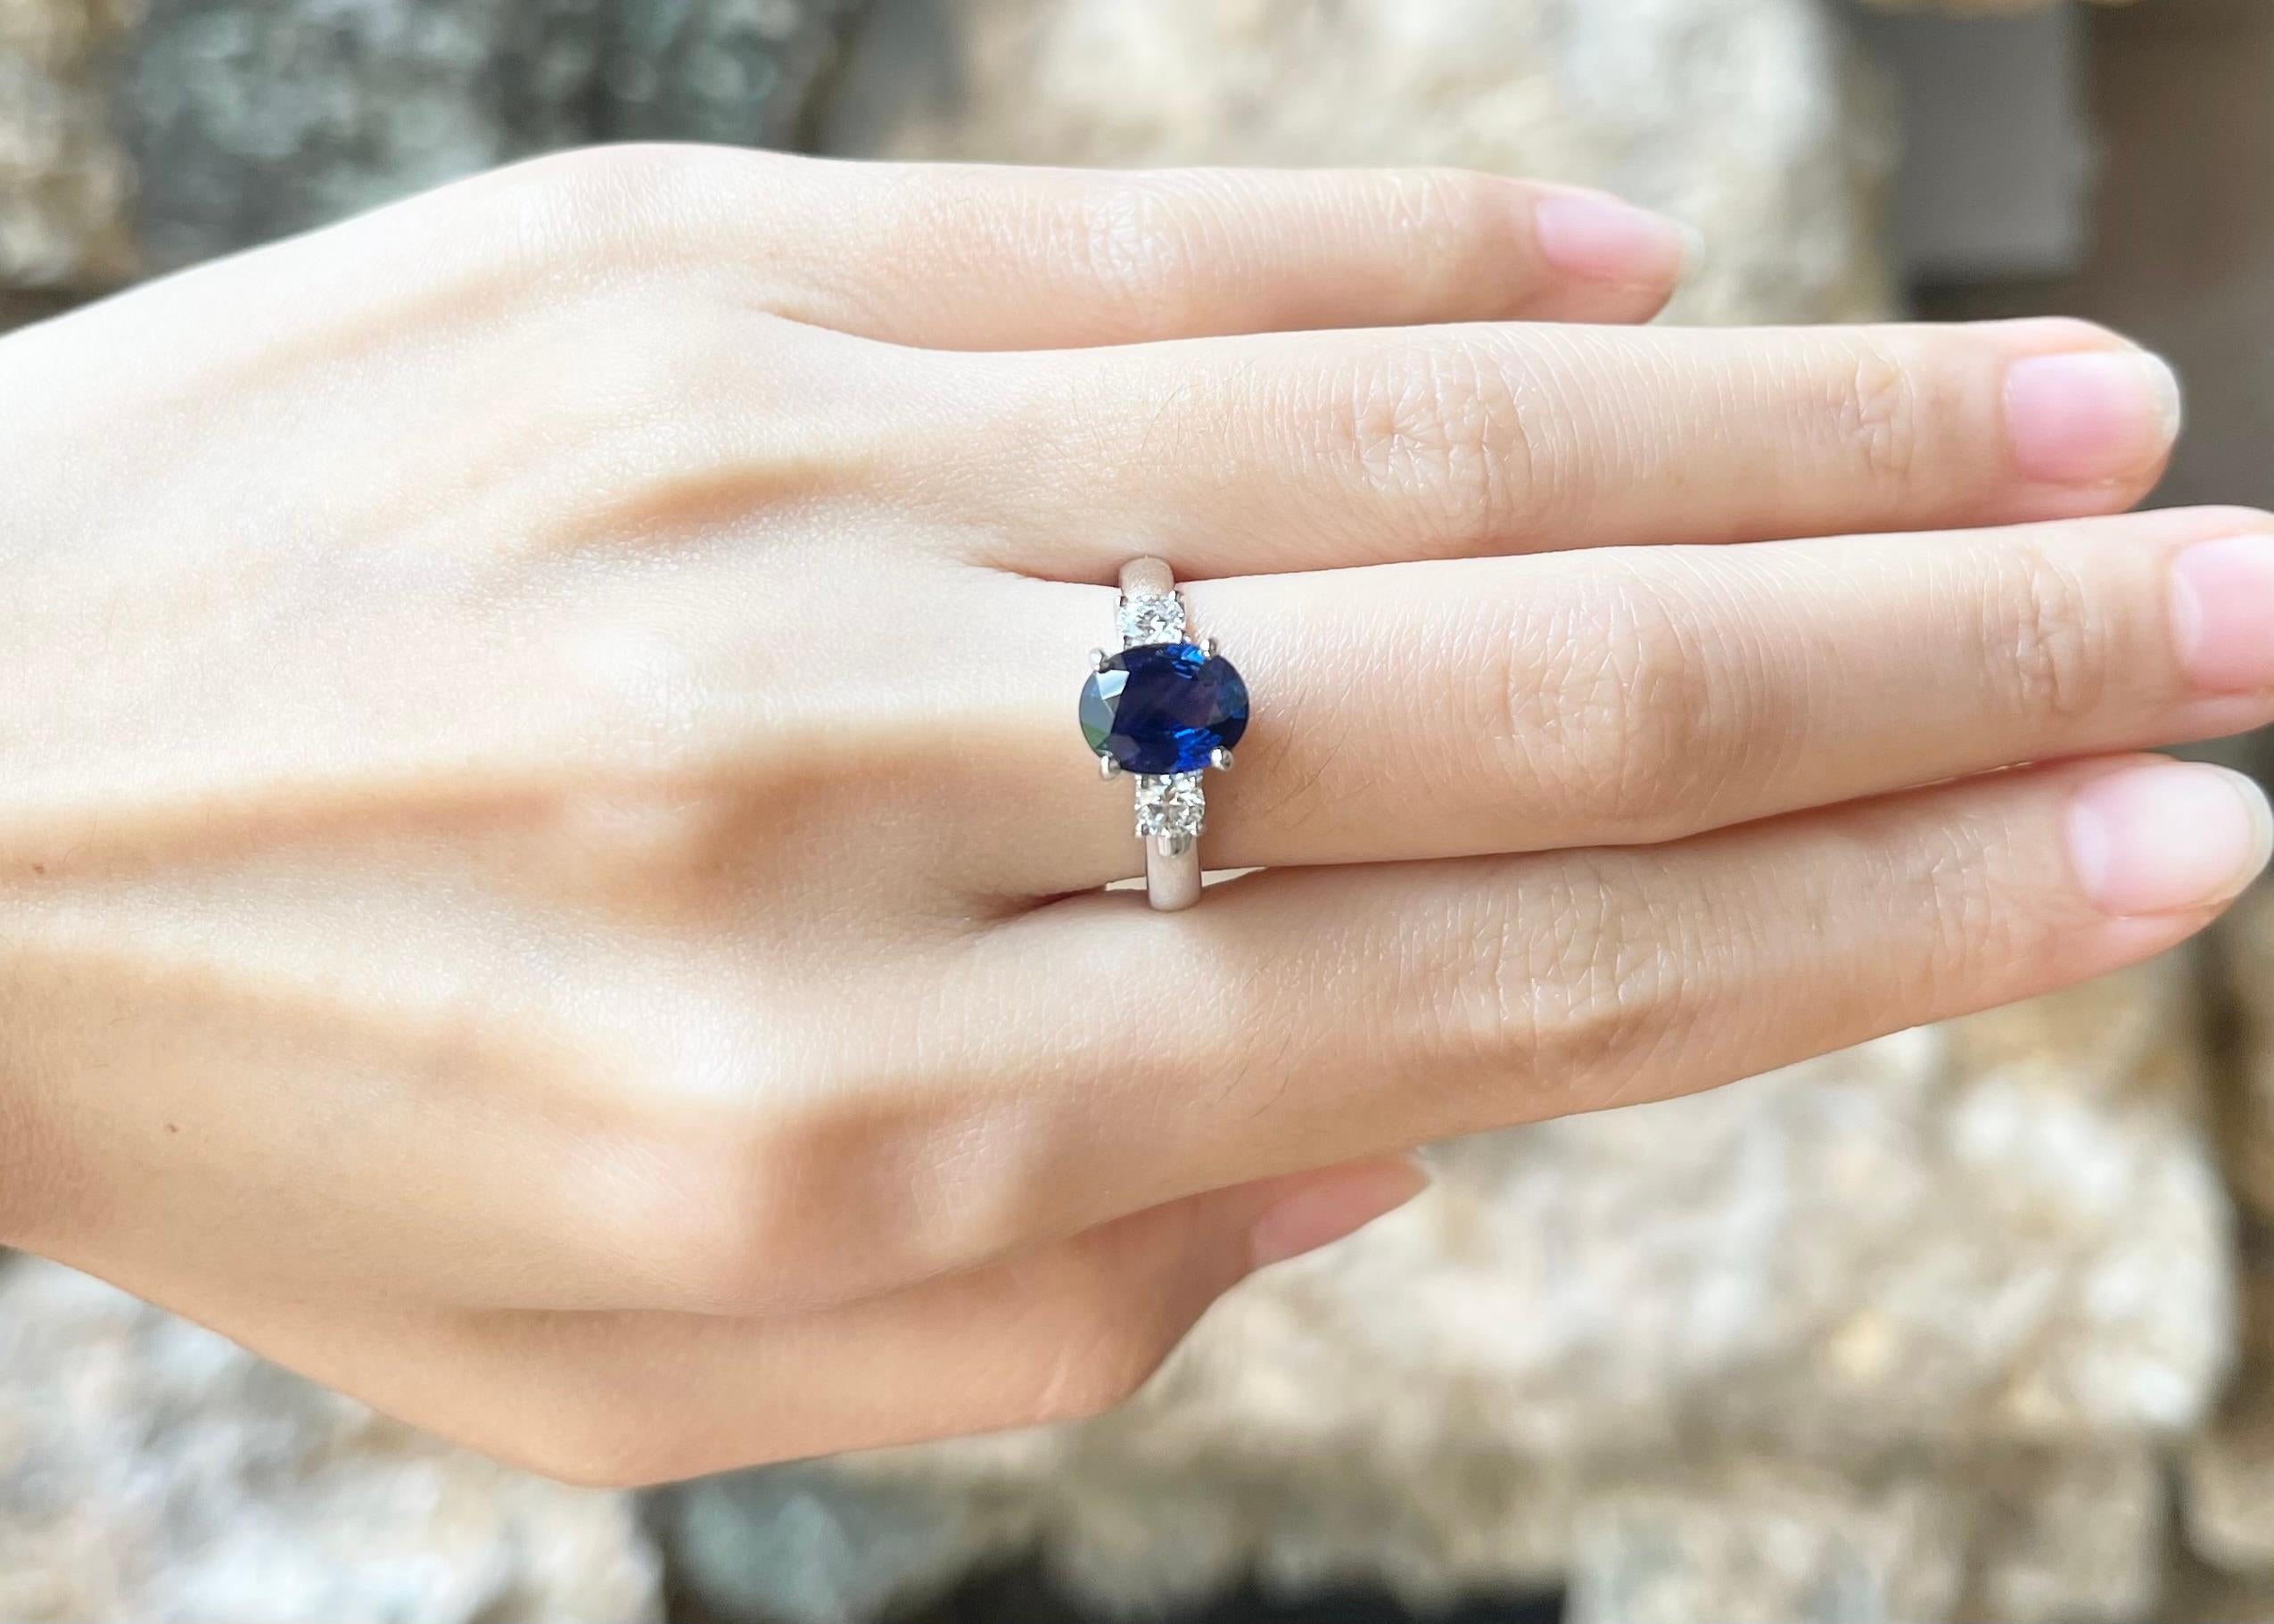 Blue Sapphire 2.50 carats with Diamond 0.41 carat Ring set in Platinum 950 Settings
(GIA Certified)

Width:  1.2 cm 
Length: 0.9 cm
Ring Size: 53
Total Weight: 6.92 grams

Blue Sapphire 
Width:  0.6 cm 
Length: 0.9 cm

